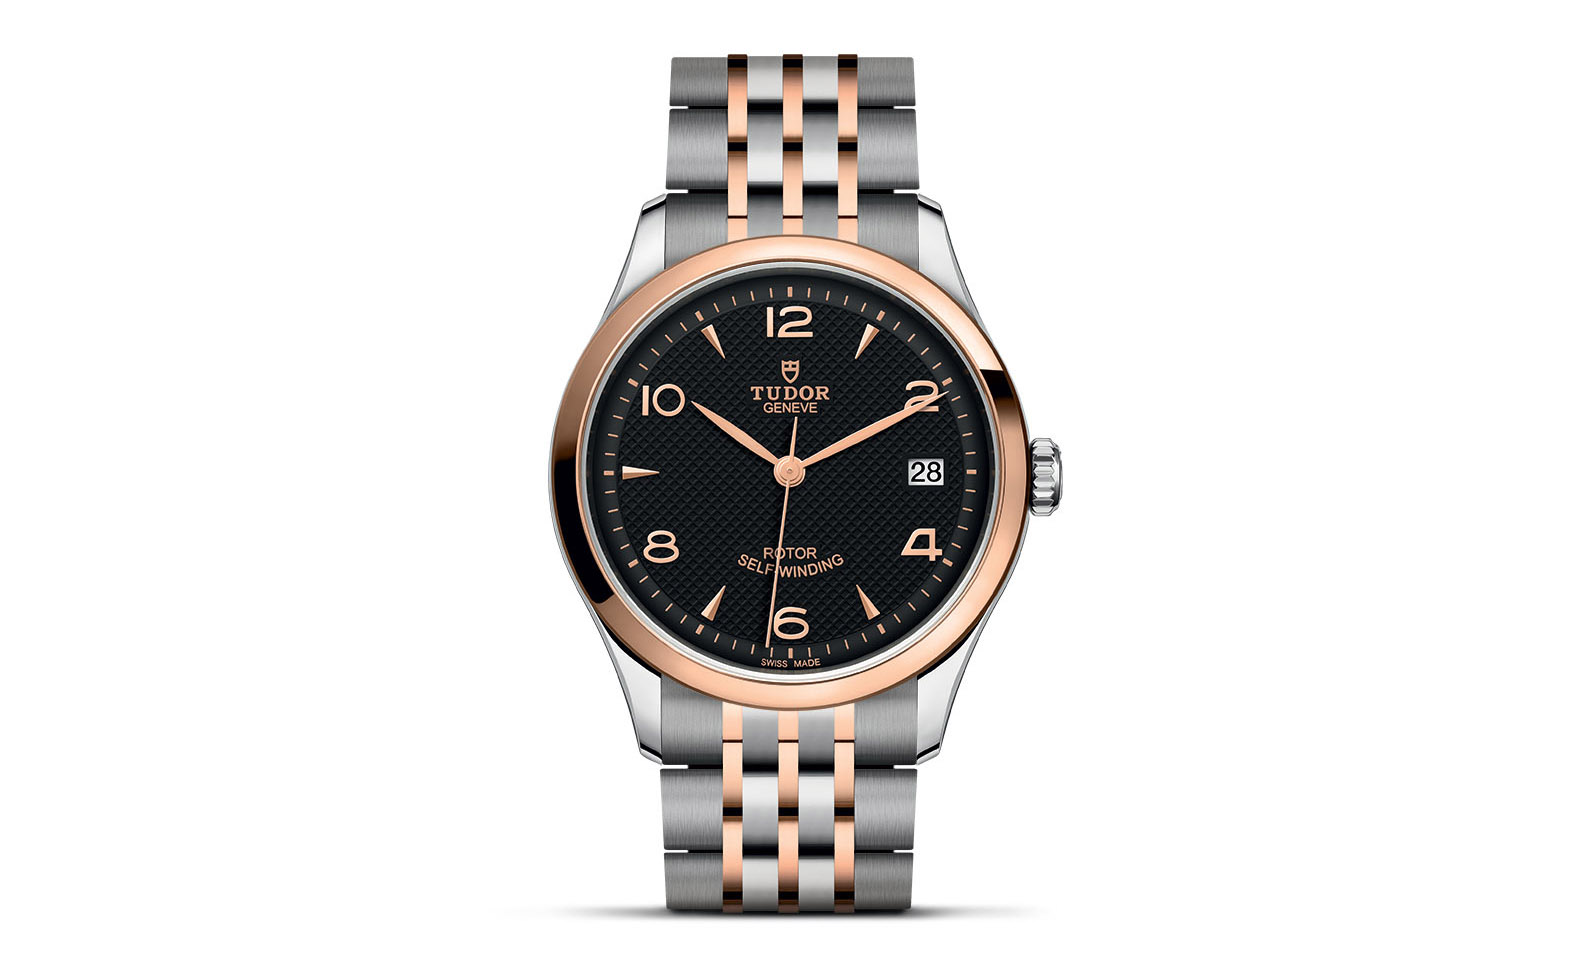 m91451-00031926-36mm-Steel-and-Rose-Gold.jpg